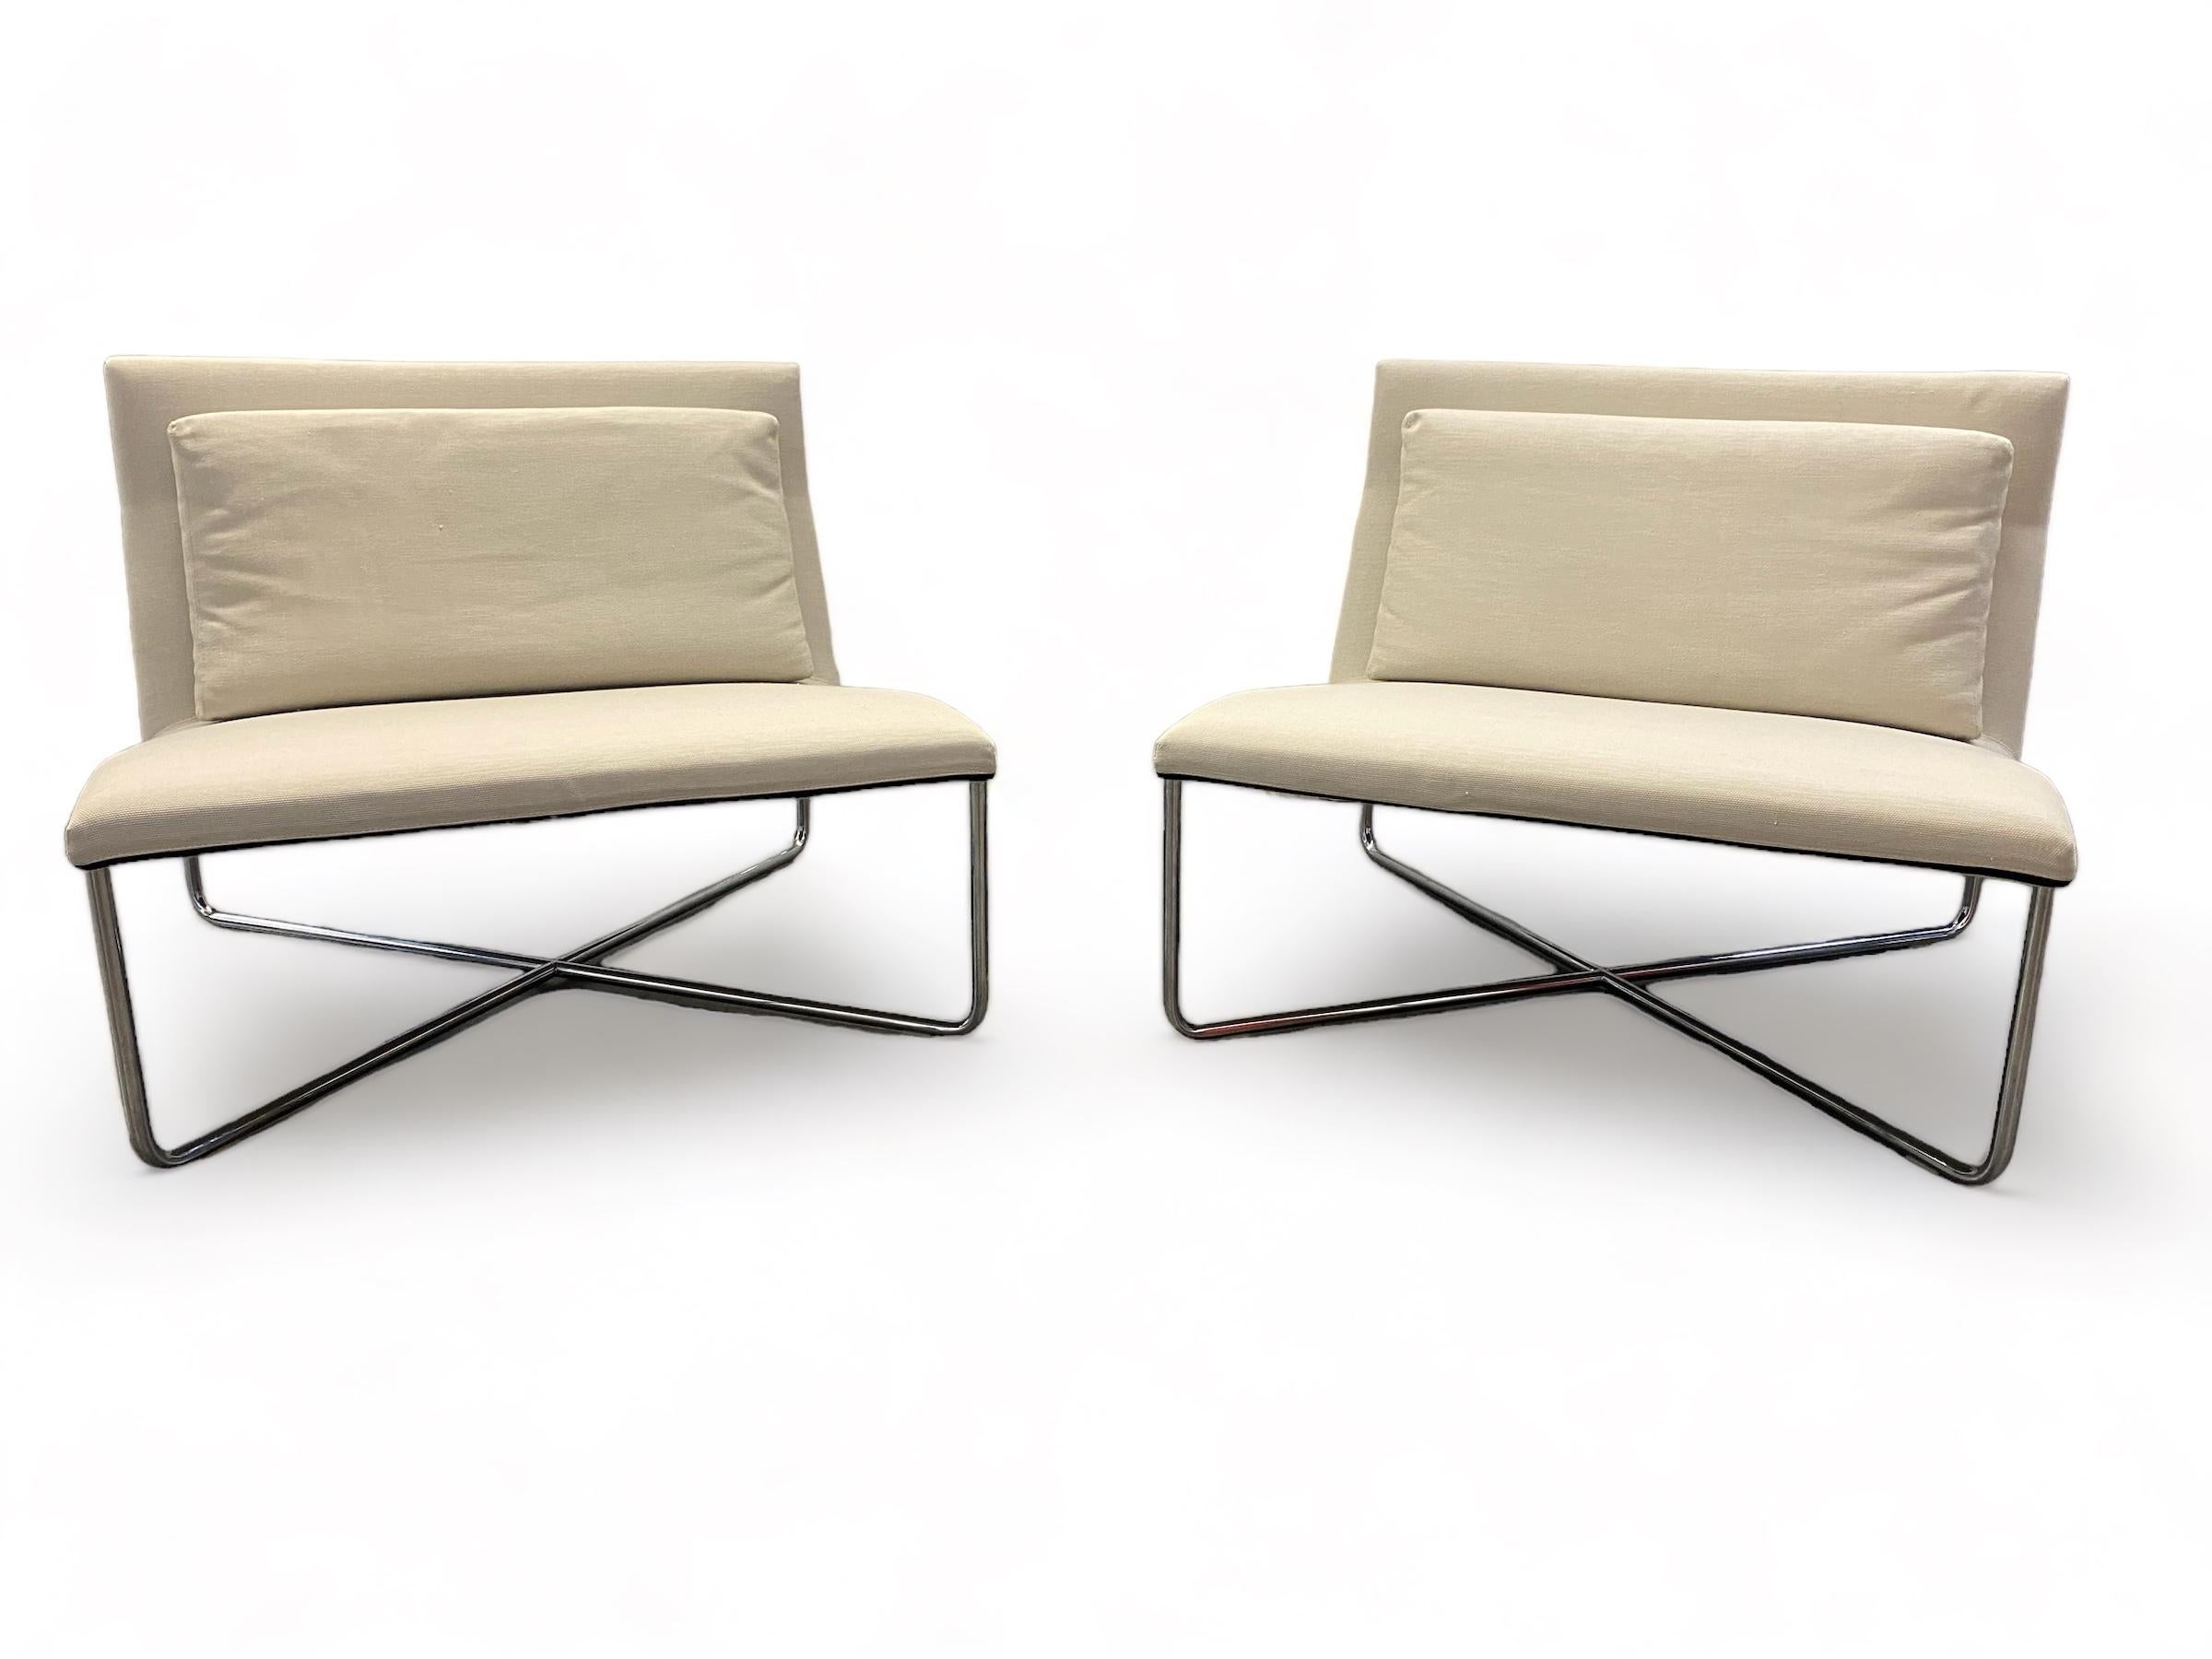 A pair of white Diller chairs designed by Rodolfo Dordoni for Minotti, Italy. 4